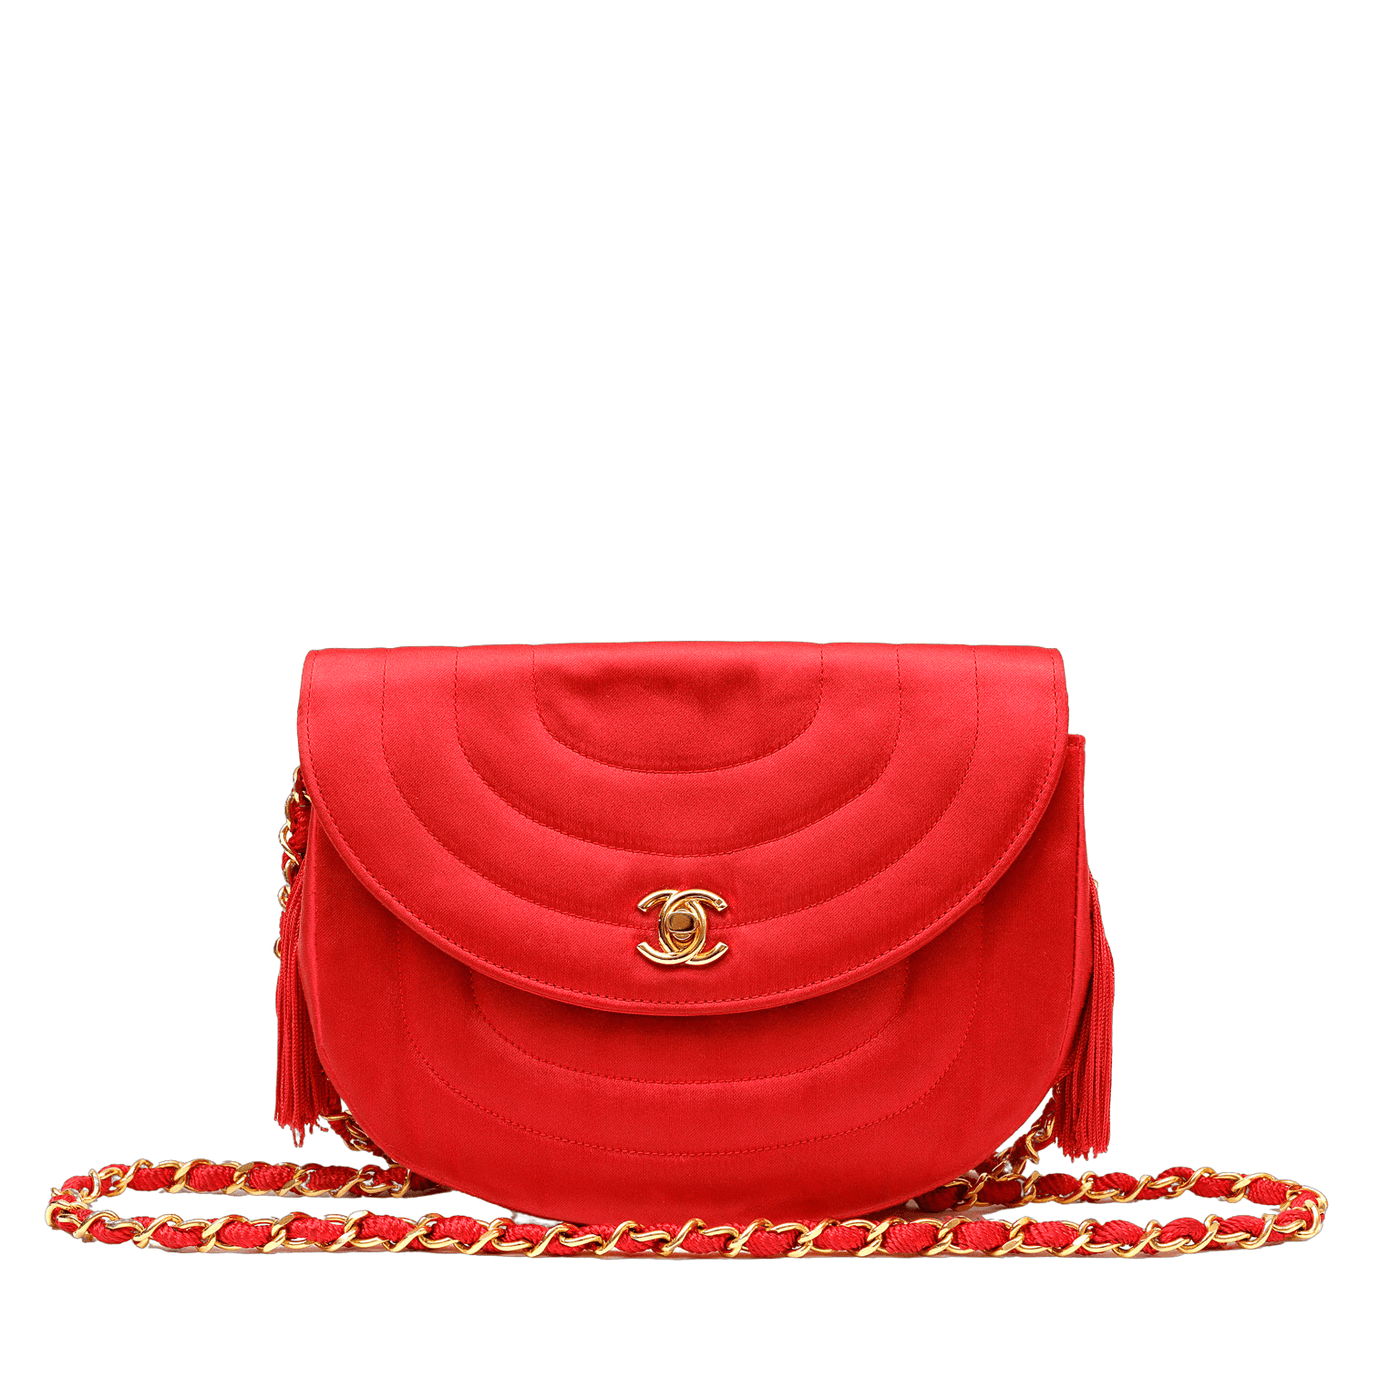 Chanel Red Satin Vintage Evening Crossbody – Only Authentics